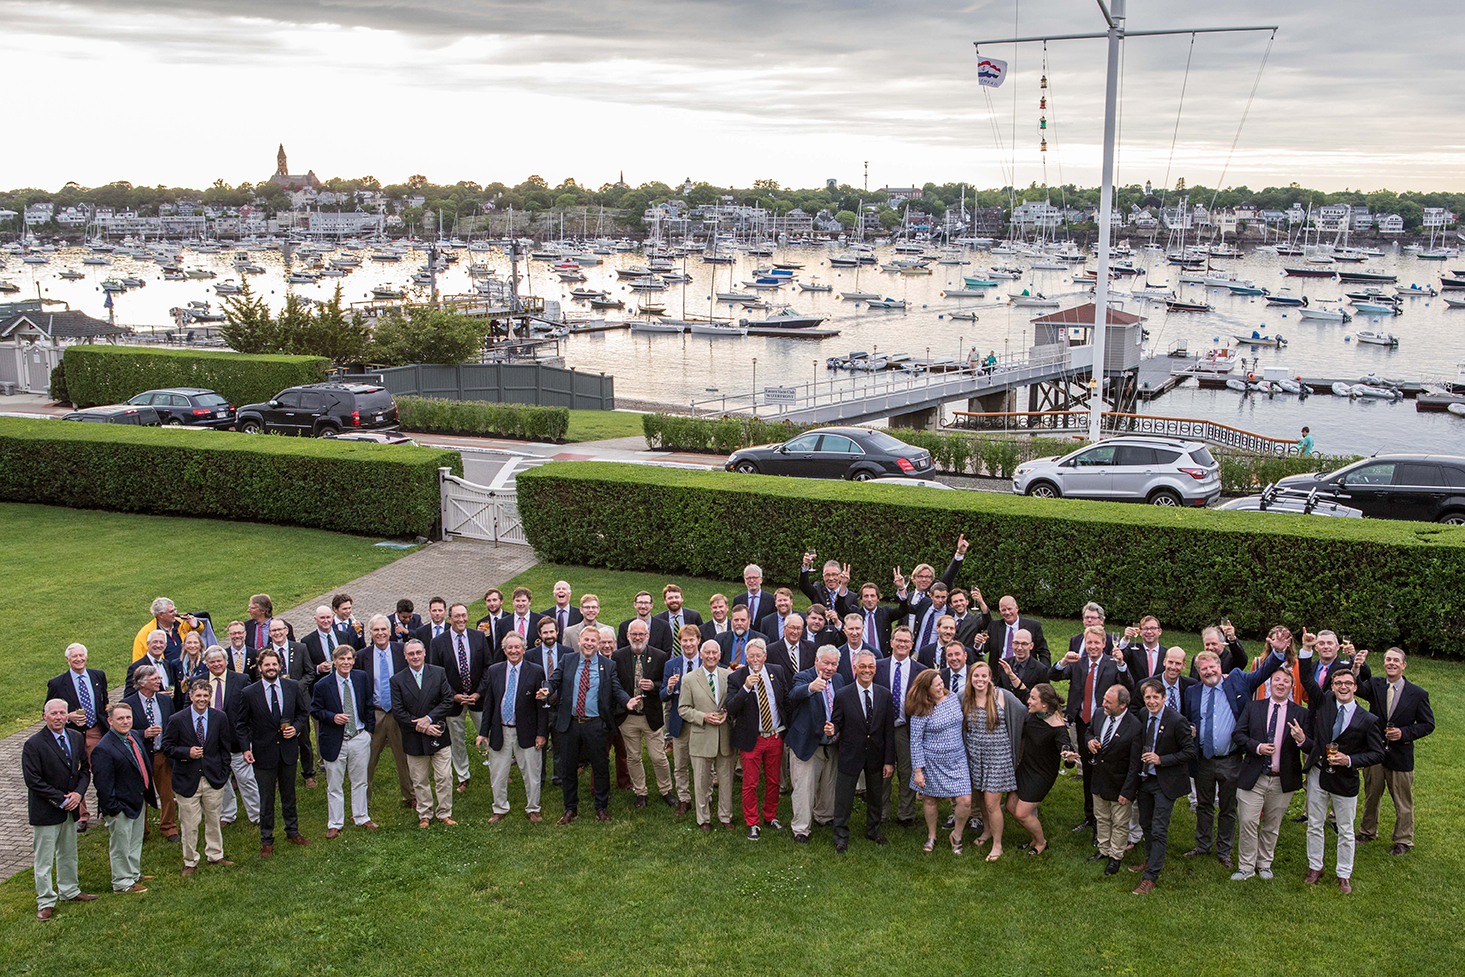 The fleet dresses up and smiles for the camera at the Eastern Yacht Club before the final awards dinner.